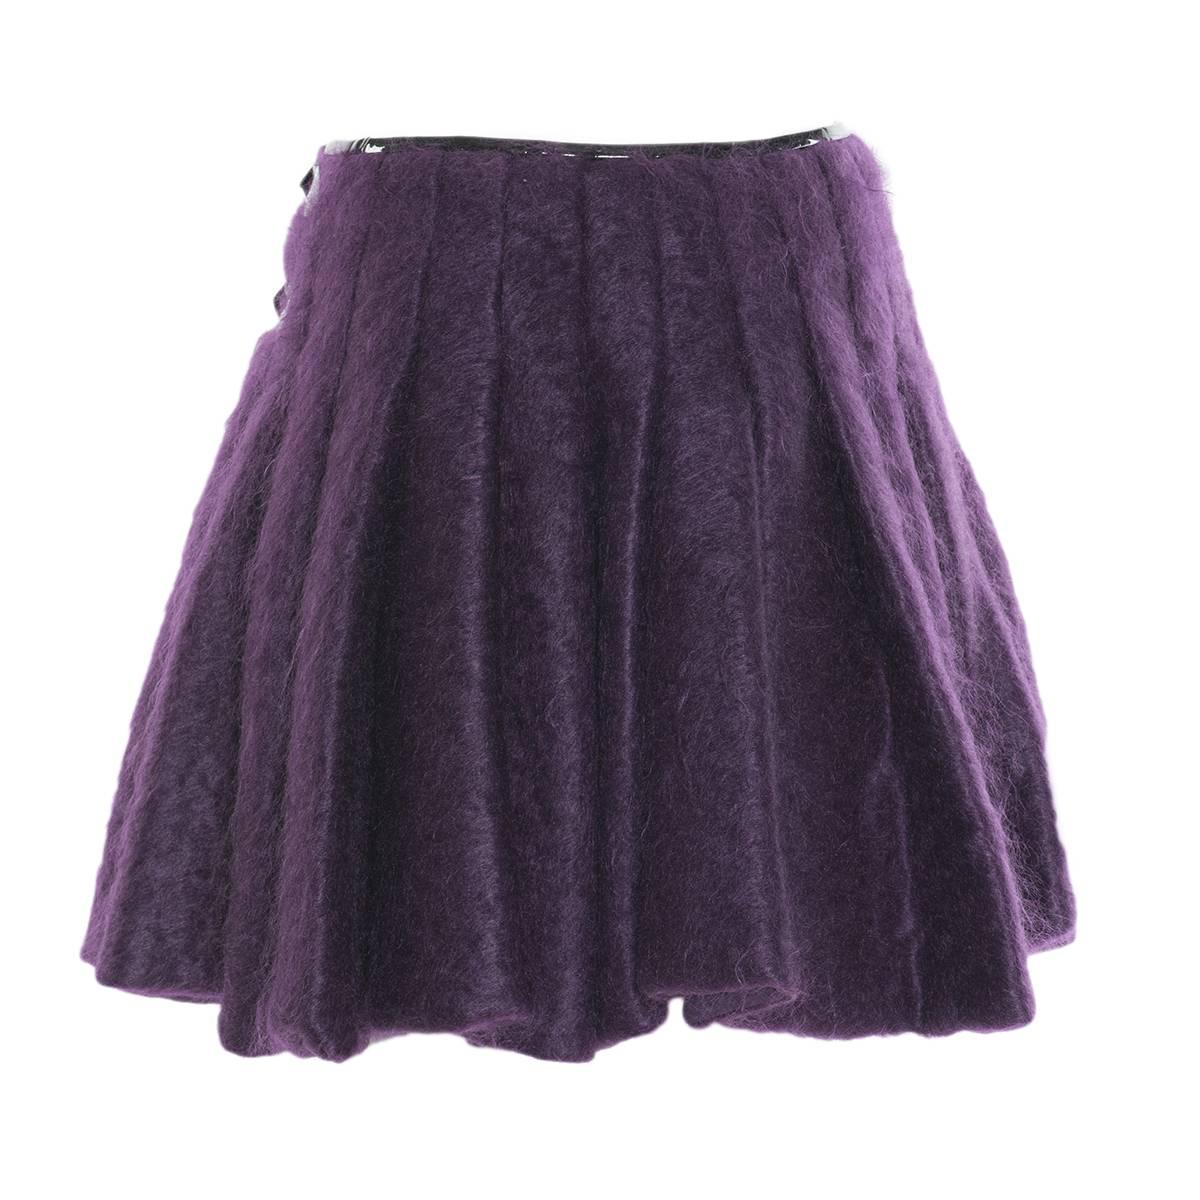 Beautiful skirt by Jean Paul Gaultier Femme
Mohair wool
Silk lining
Purple color
Black patent leather profile and belts
Made in Italy
Worldwide express shipping included in the price !